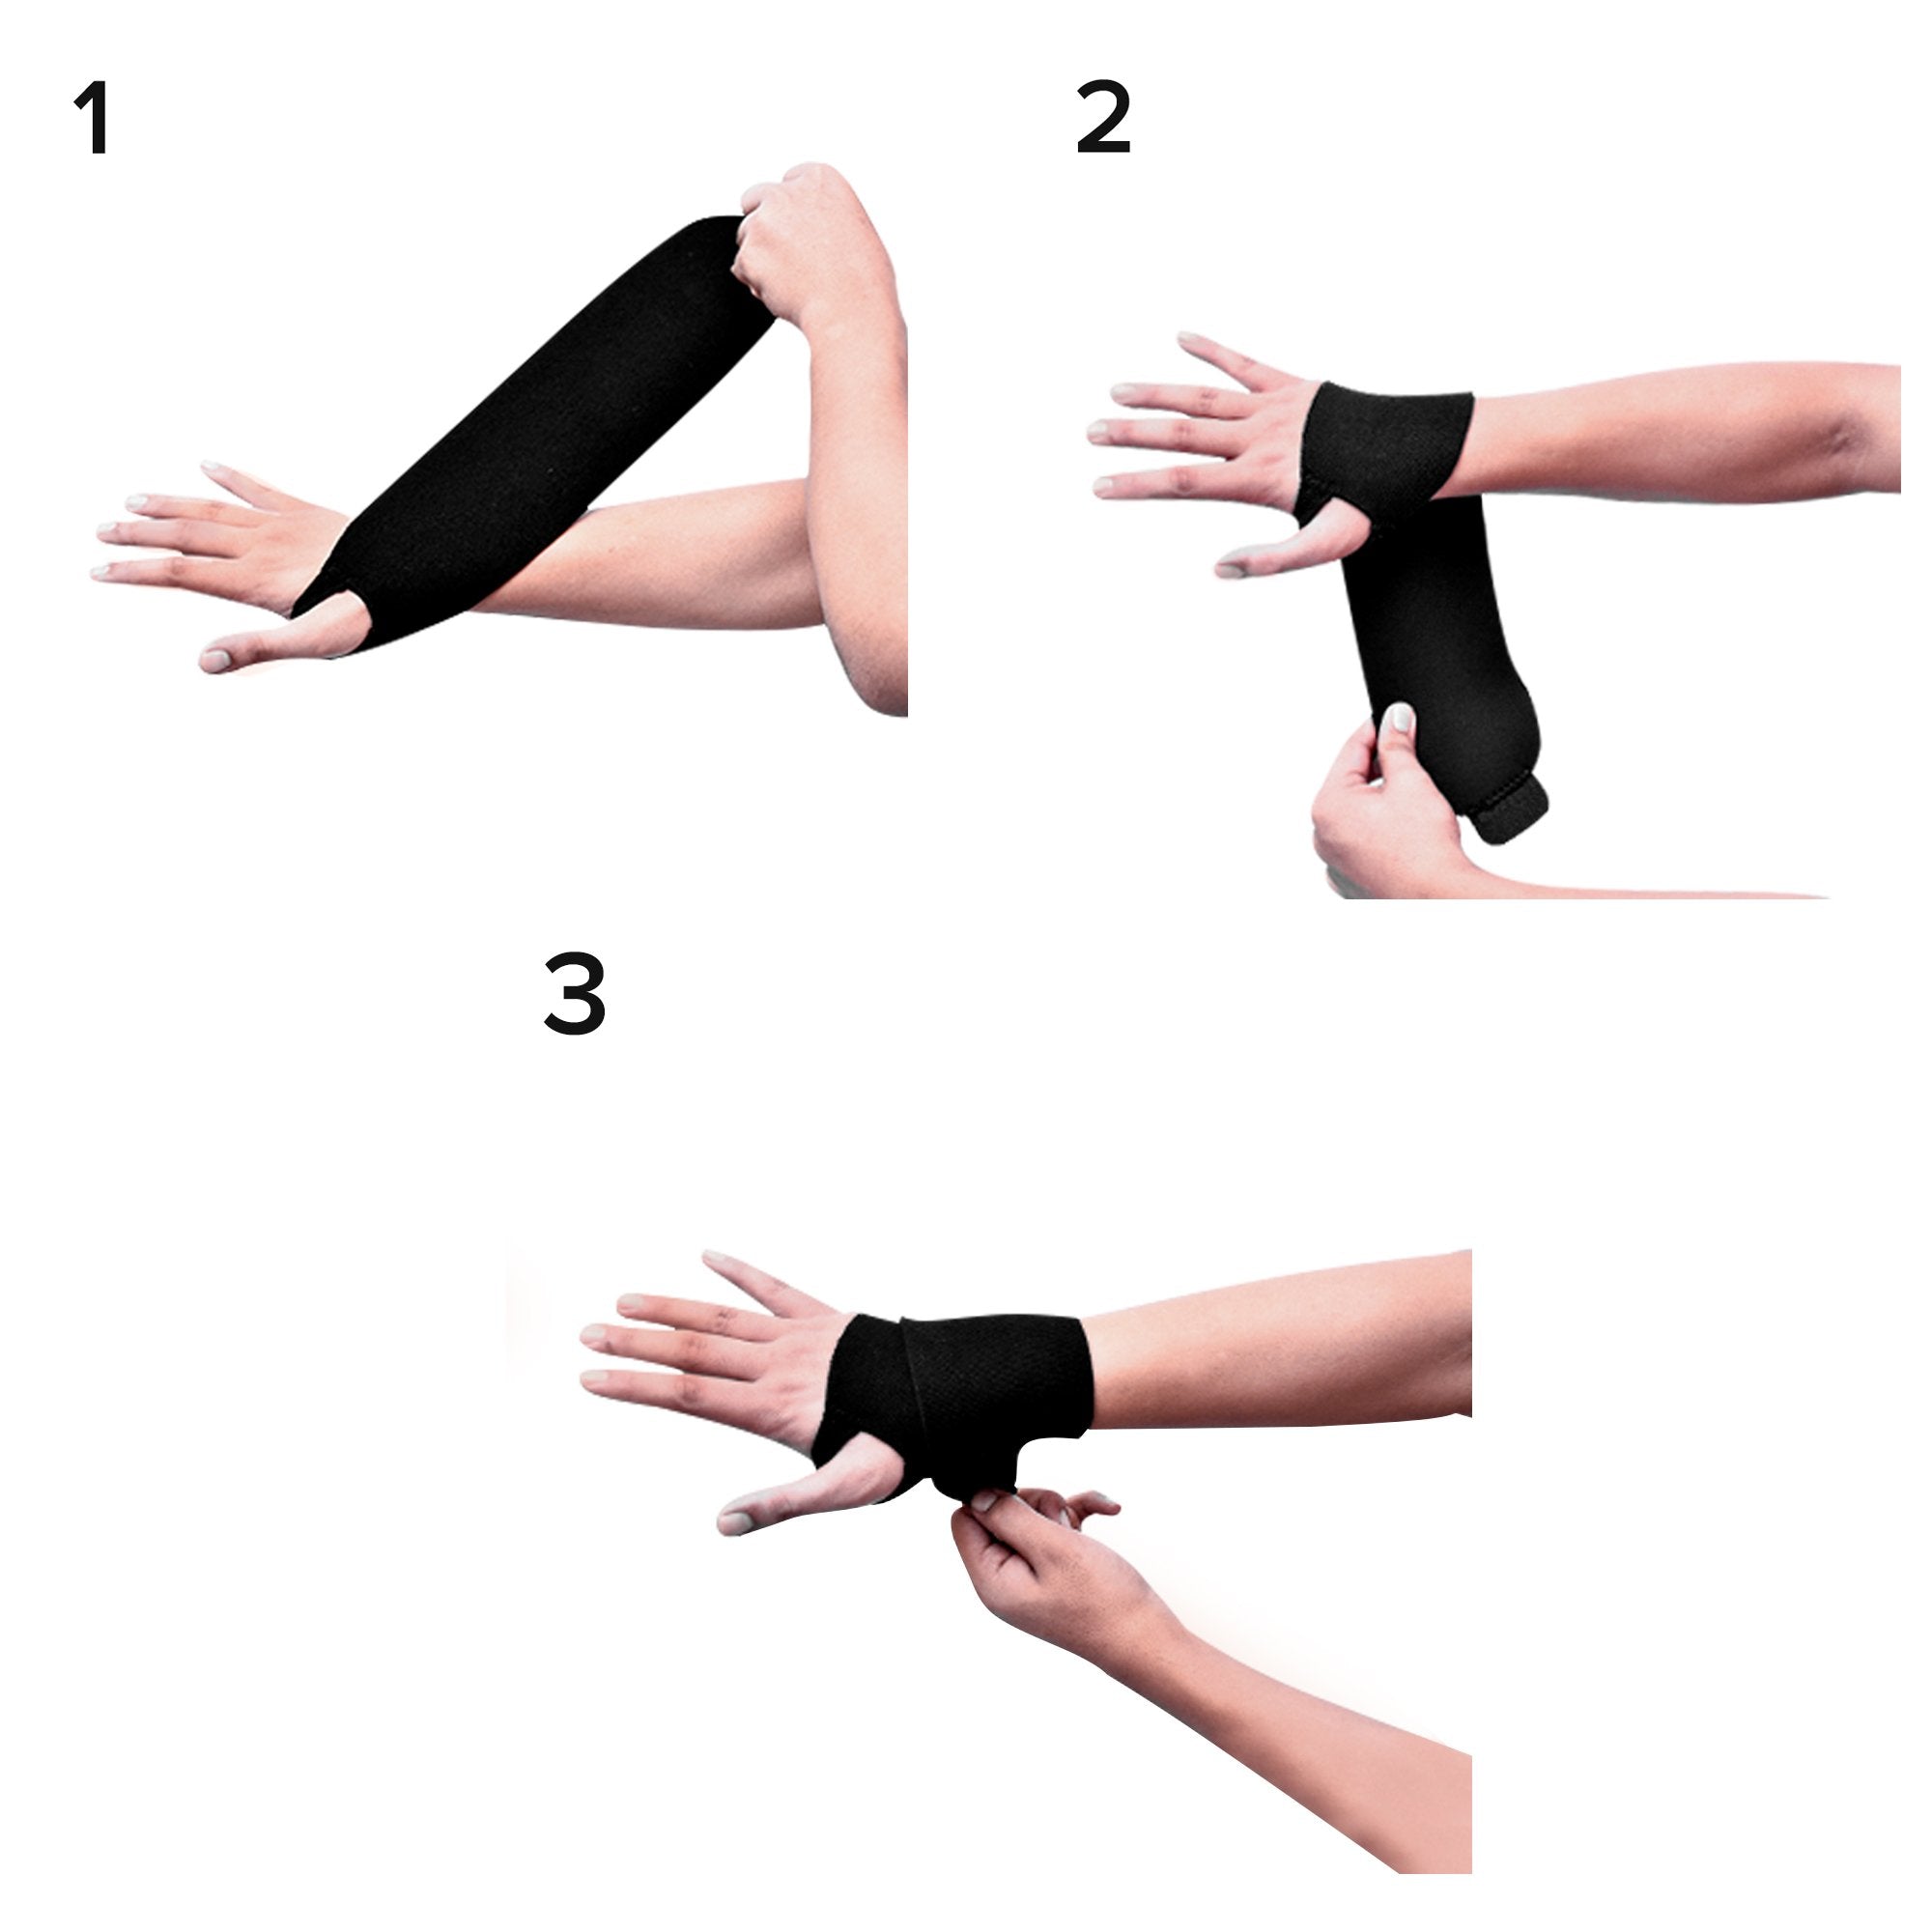 Futuro For Her Wrist Support Free Size - Right